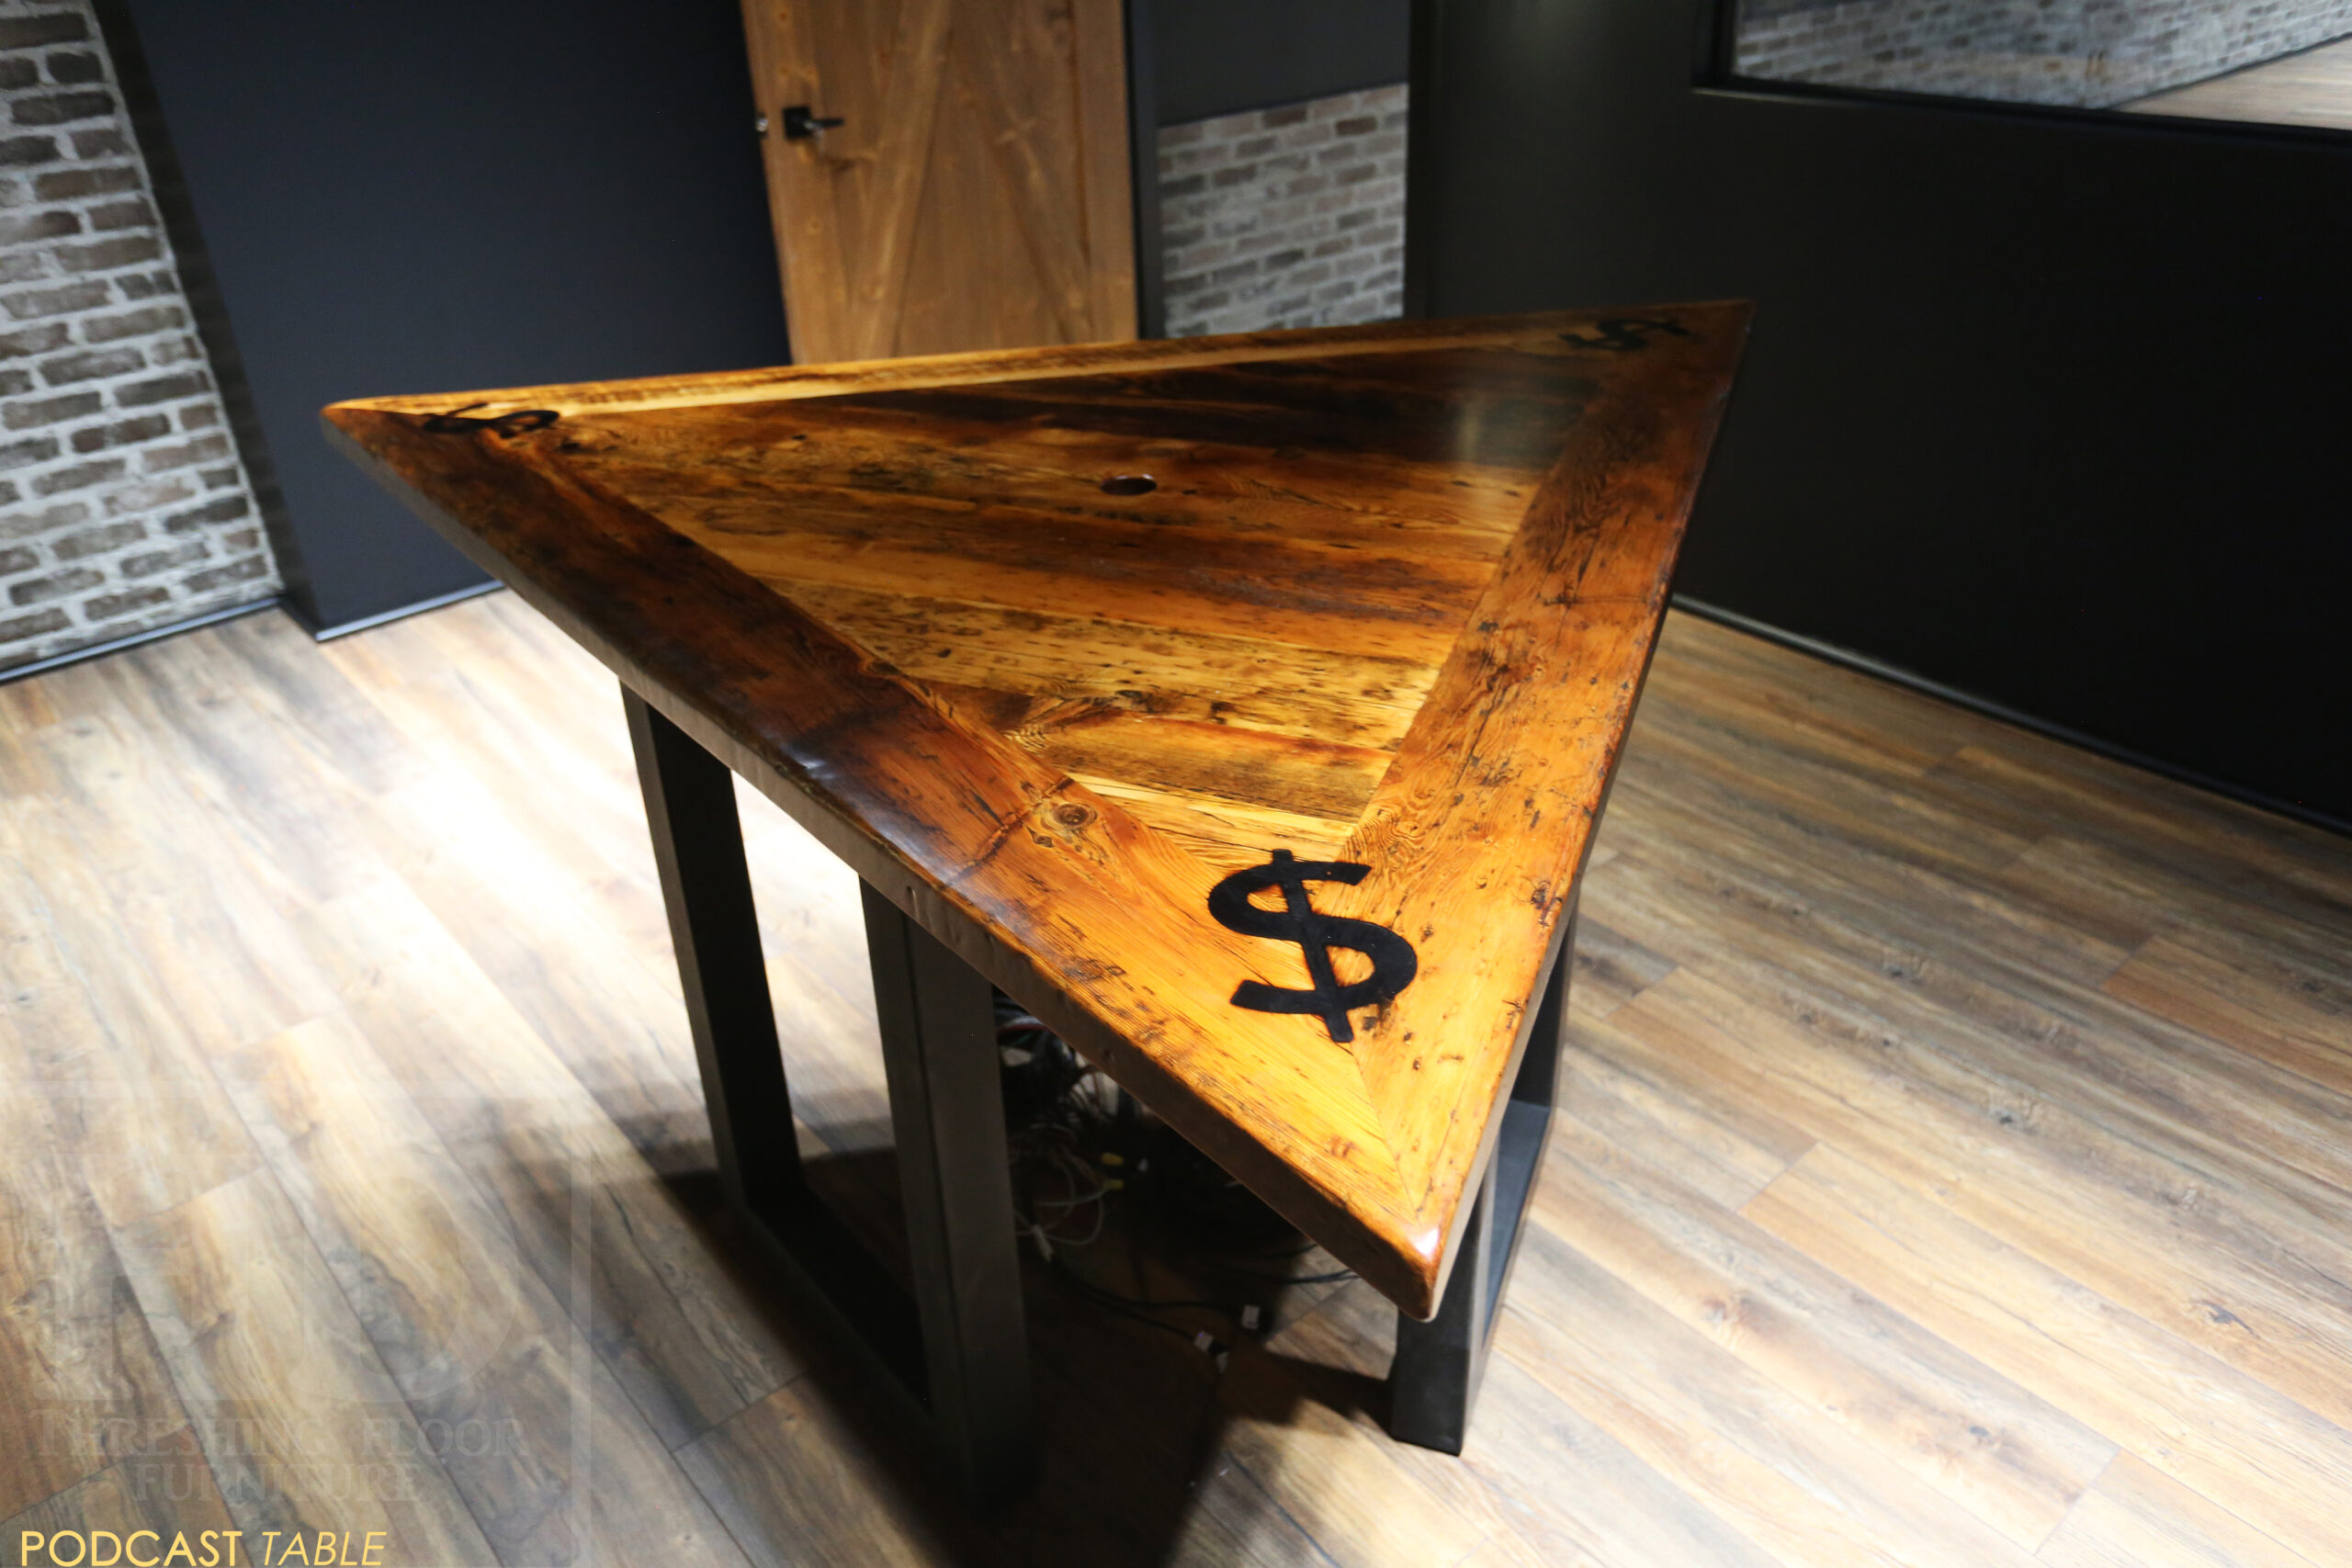 Project Summary: 6’ Per Side Triangle Reclaimed Ontario Barnwood Podcast Table - Made for a Burlington, Ontario home – 36” height – 3 Metal U Shaped Posts - Mitred Corners - Old Growth Hemlock Threshing Floor Construction - Original edges & distressing maintained - Premium epoxy + satin polyurethane finish – Centre Grommet Hole for Electronics - Custom Logo Brand Burn Embedded - www.table.ca